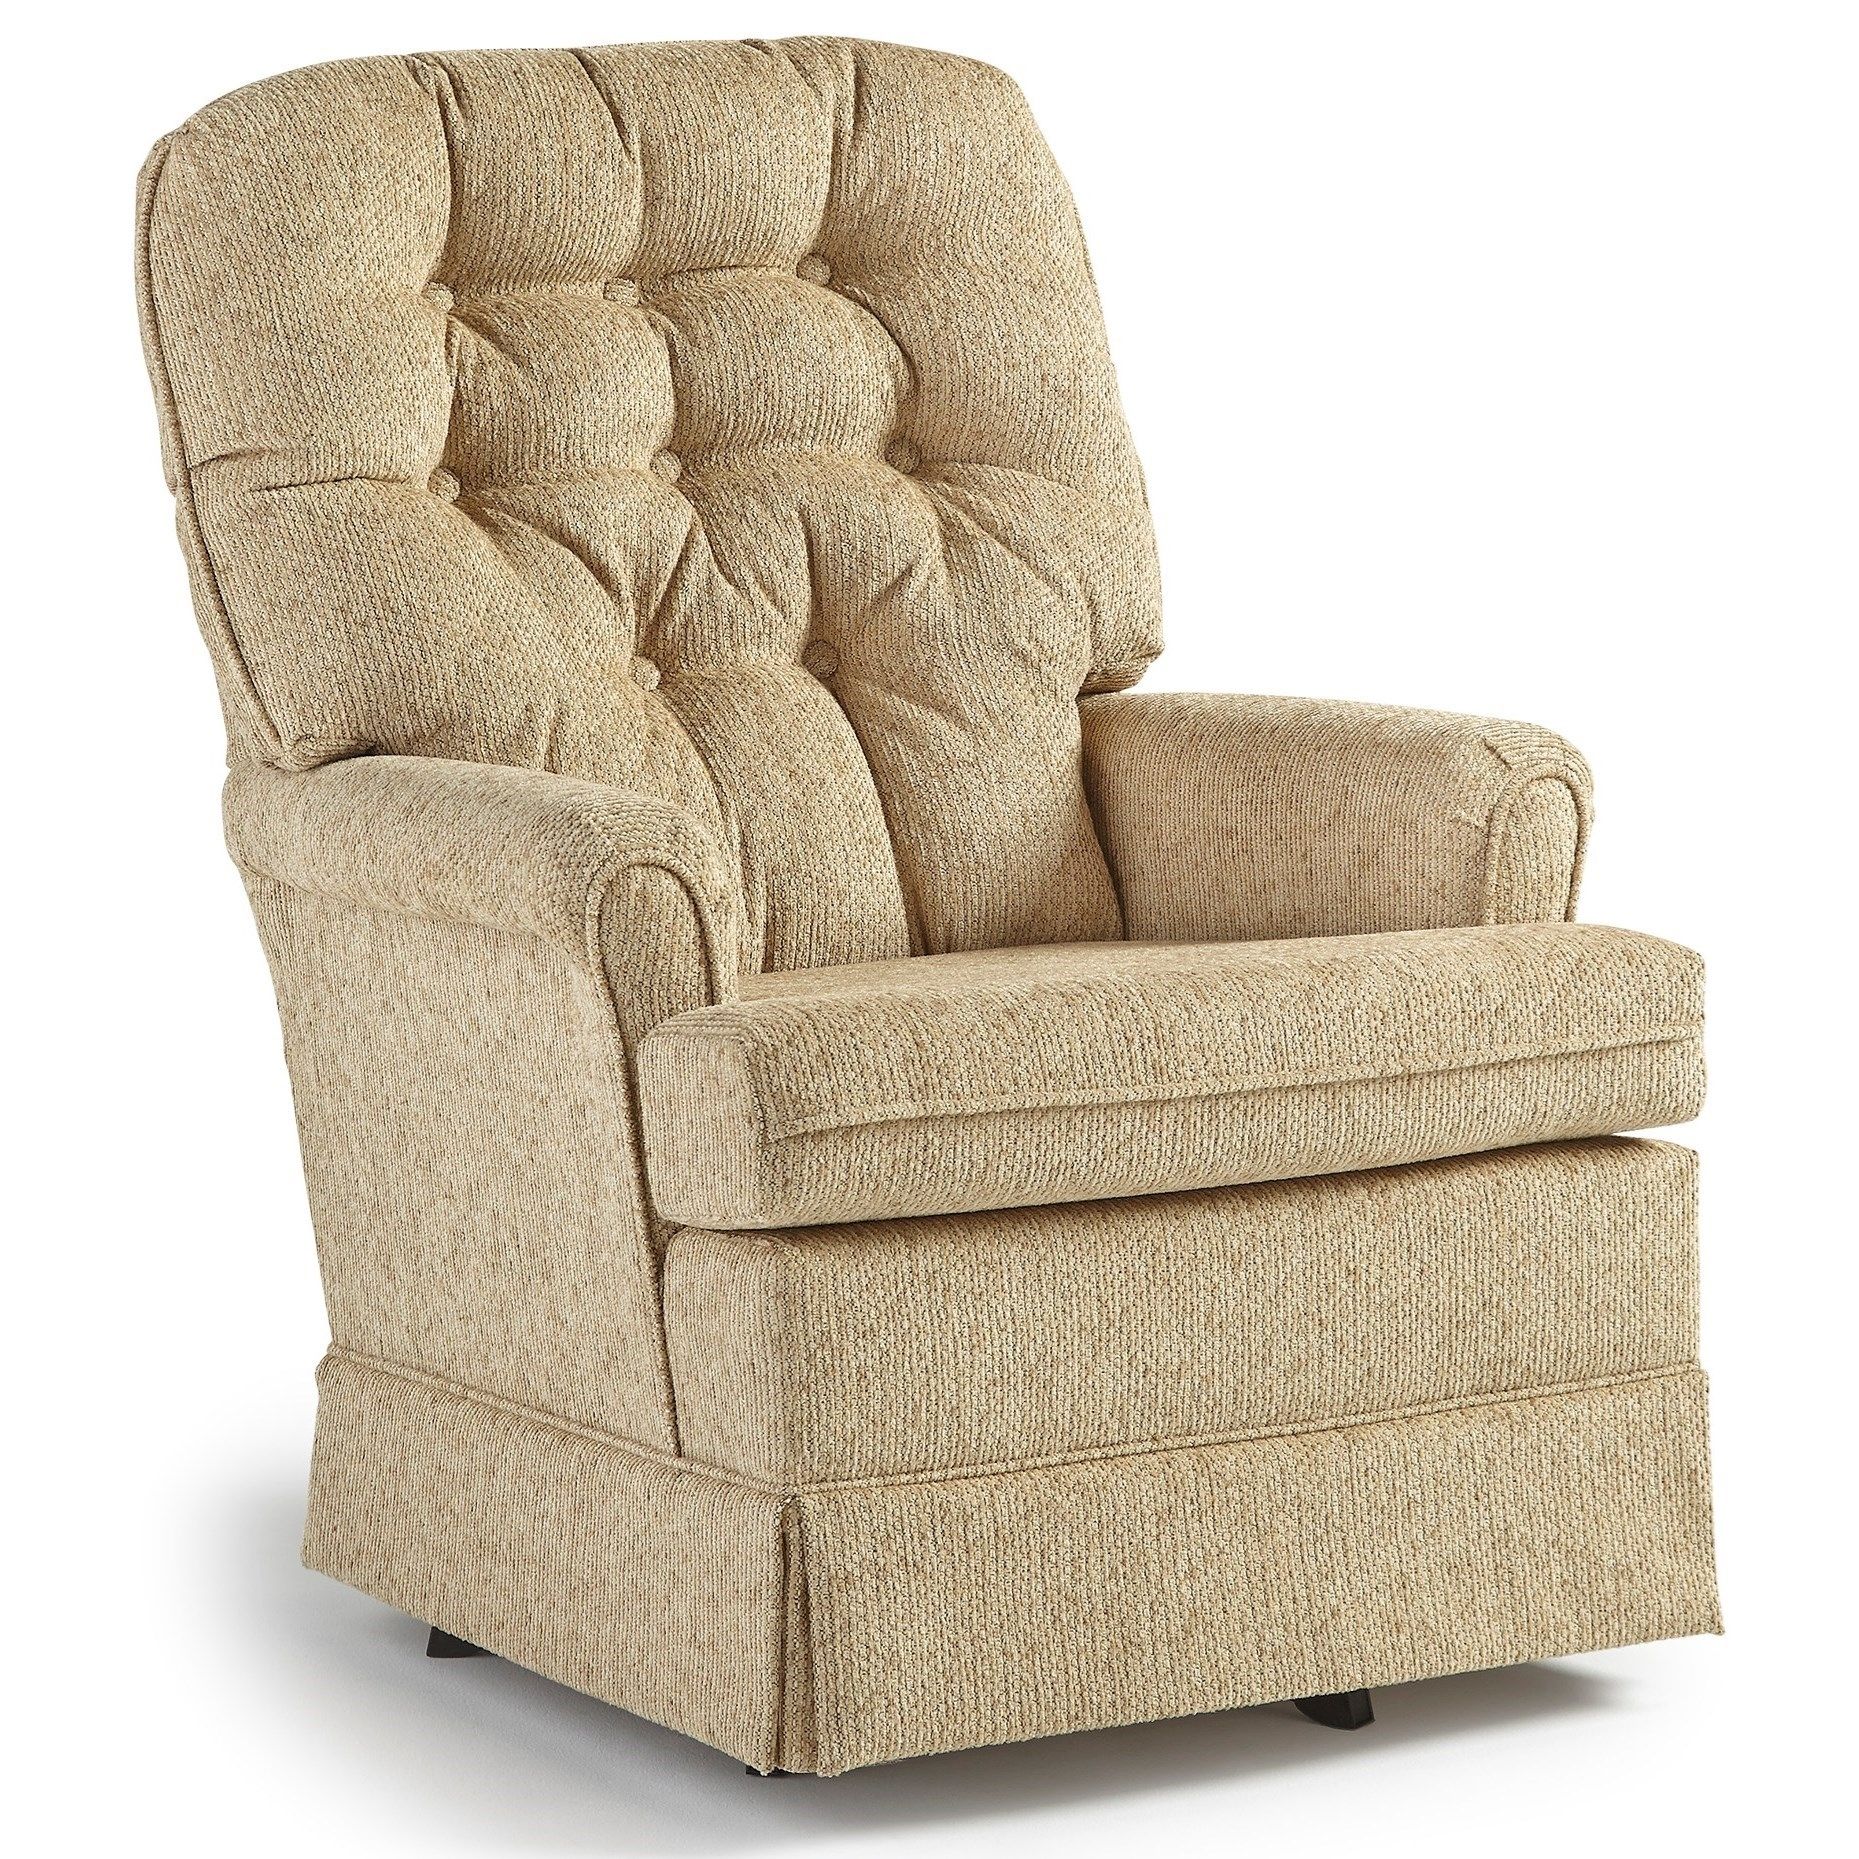 Best Home Furnishings Swivel Glide Chairs Joplin Swivel Rocker Chair With Swivel Rocking Chairs (View 2 of 15)